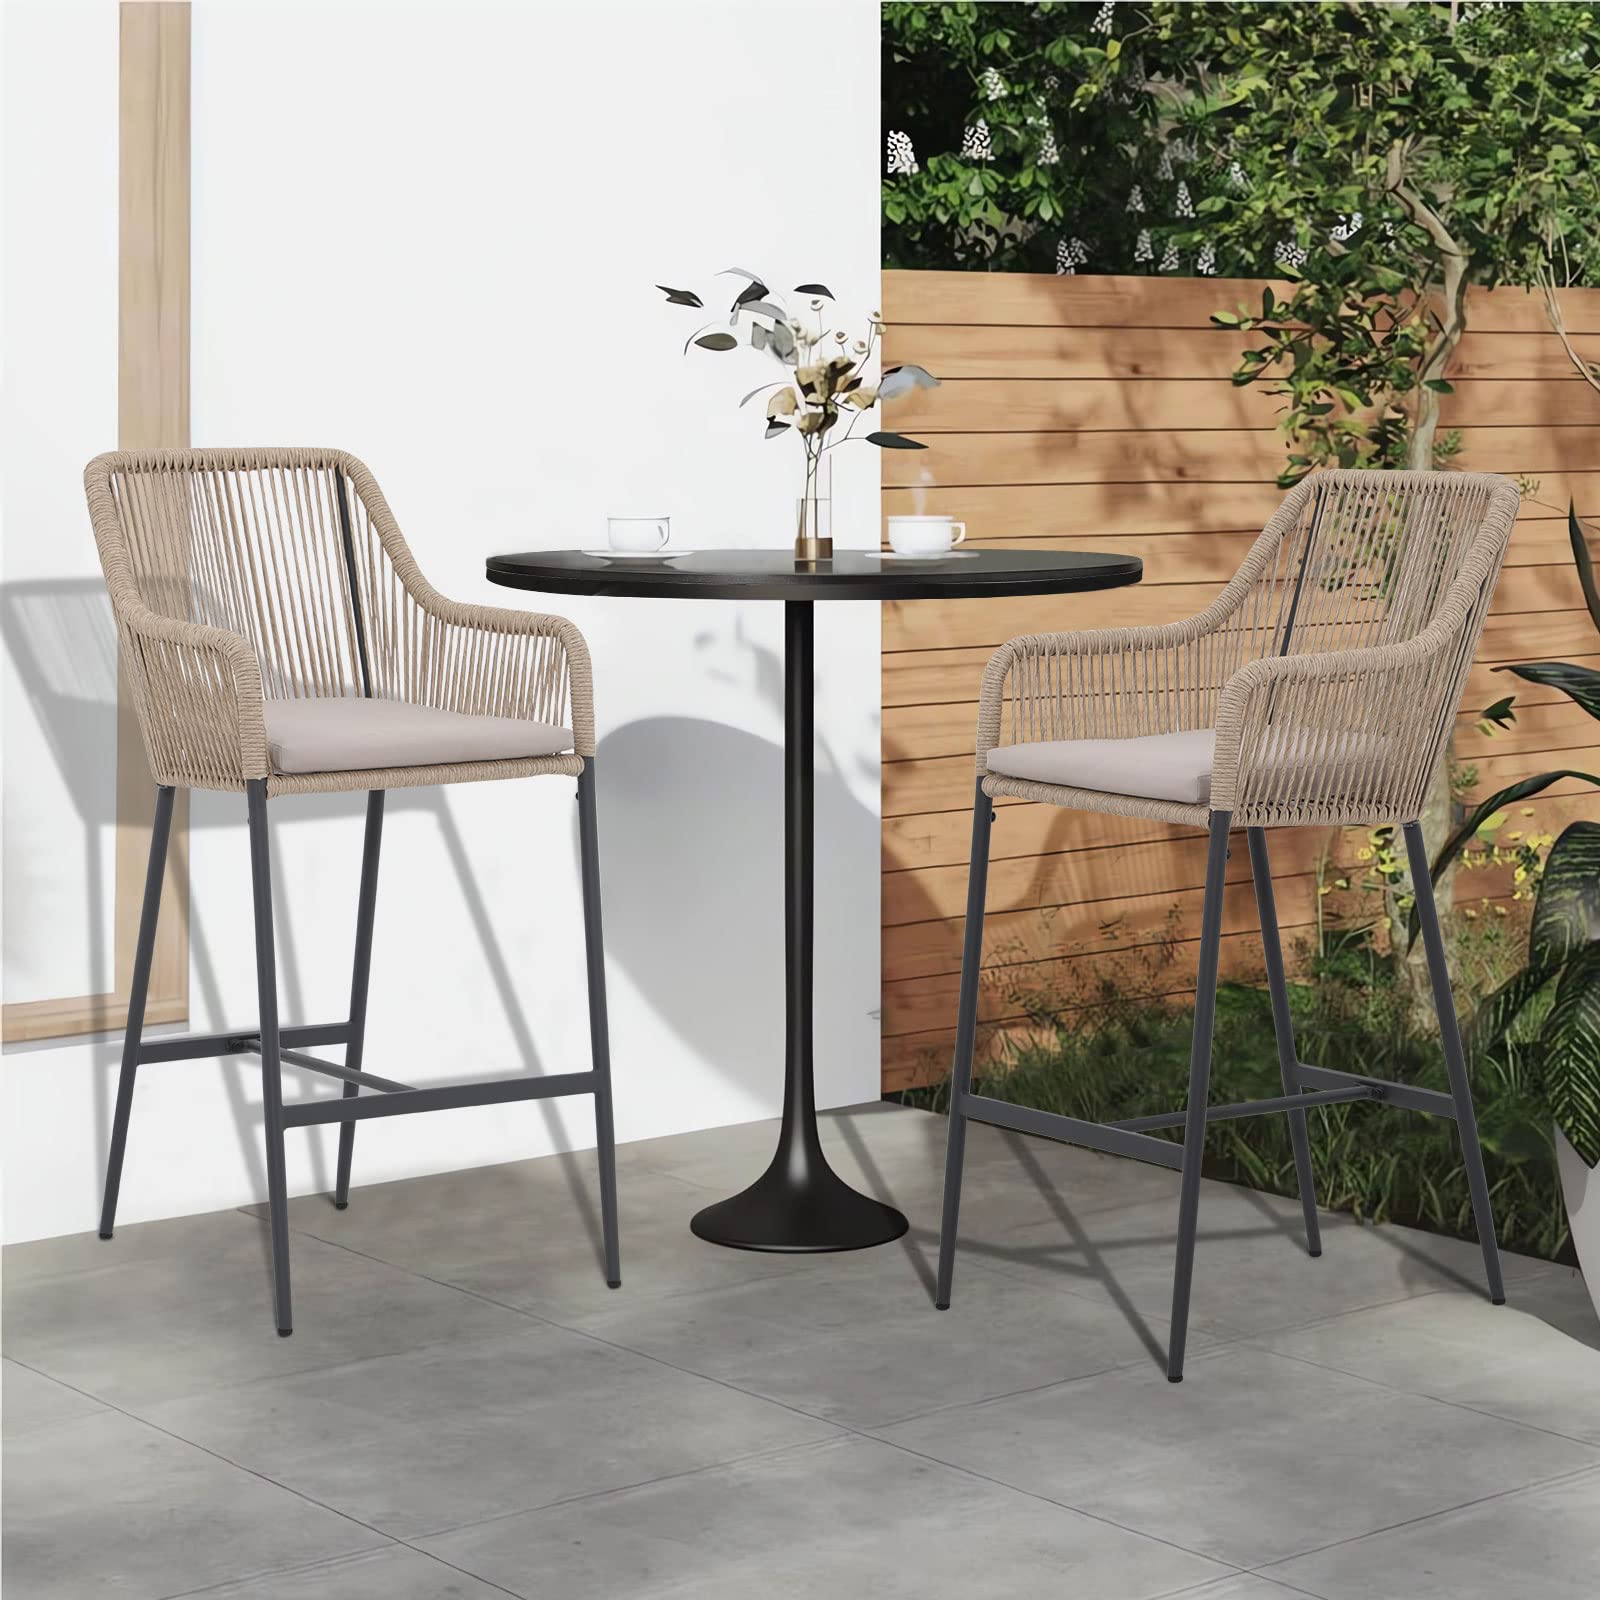 Hallerbos Wicker Bar Stools with Cushions, Set of 2